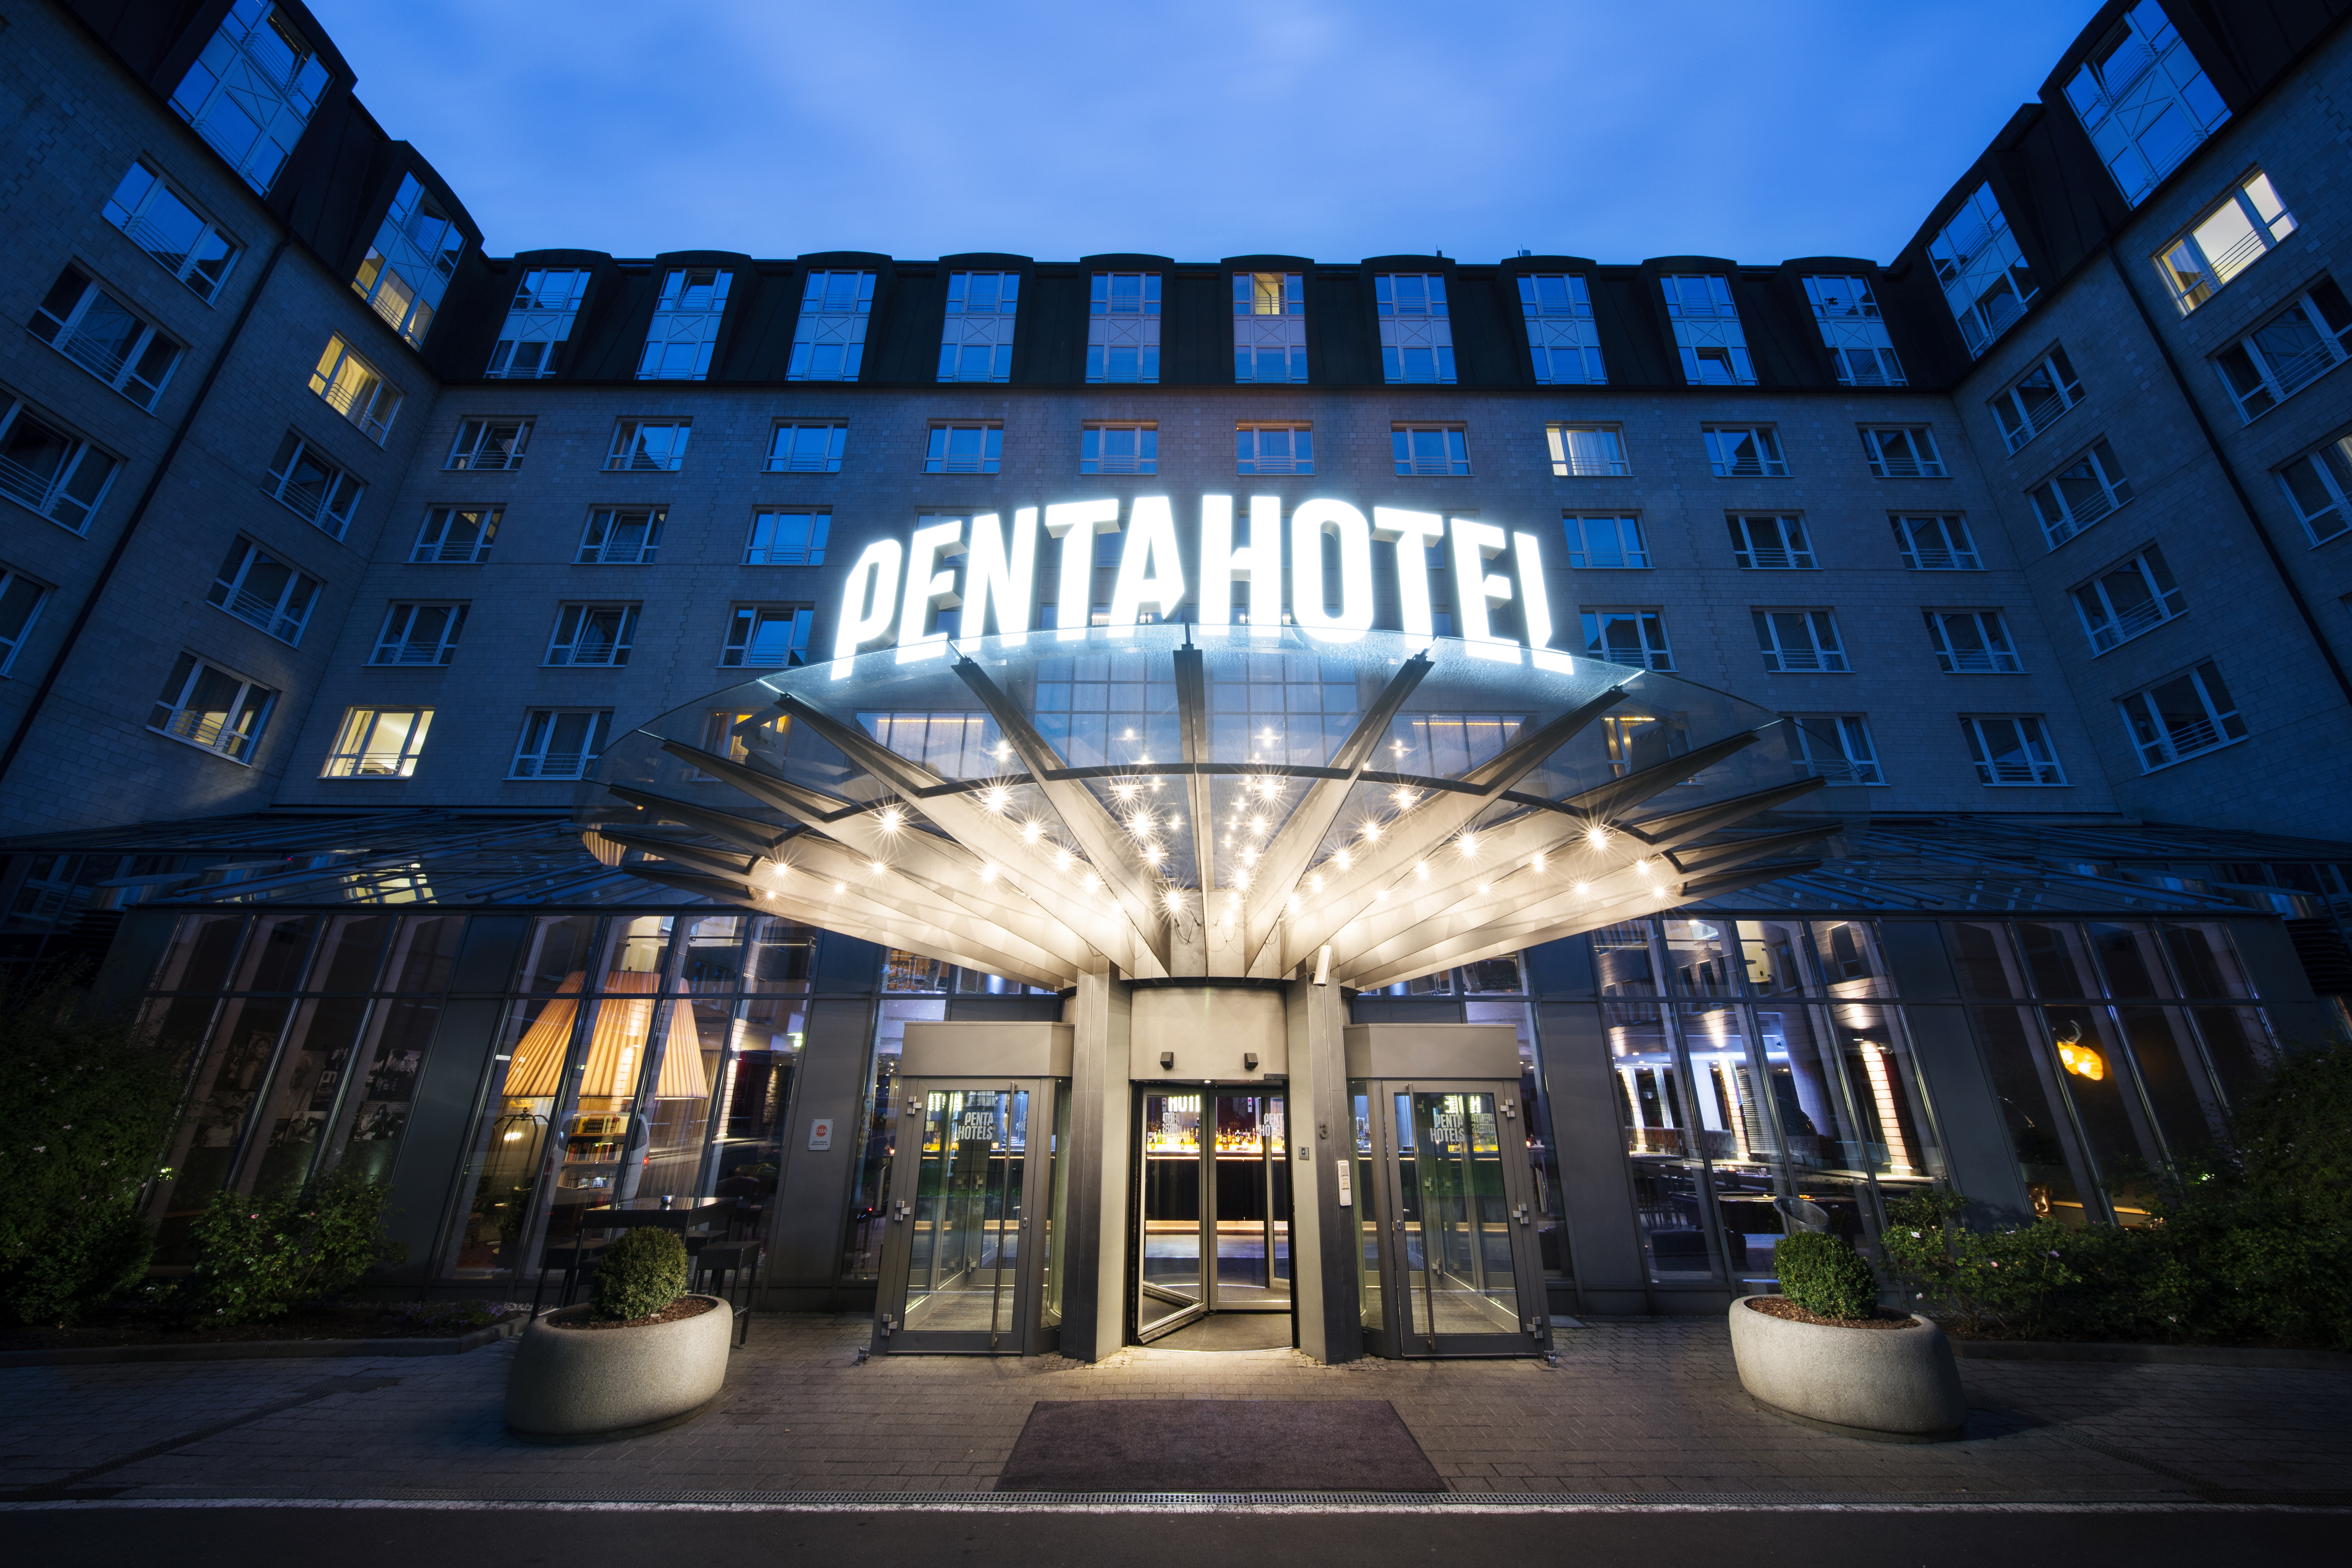 Pentahotel Leipzig <br/>111.00 ew <br/> <a href='http://vakantieoplossing.nl/outpage/?id=5defd9a686acca93029a77a8962673ac' target='_blank'>View Details</a>